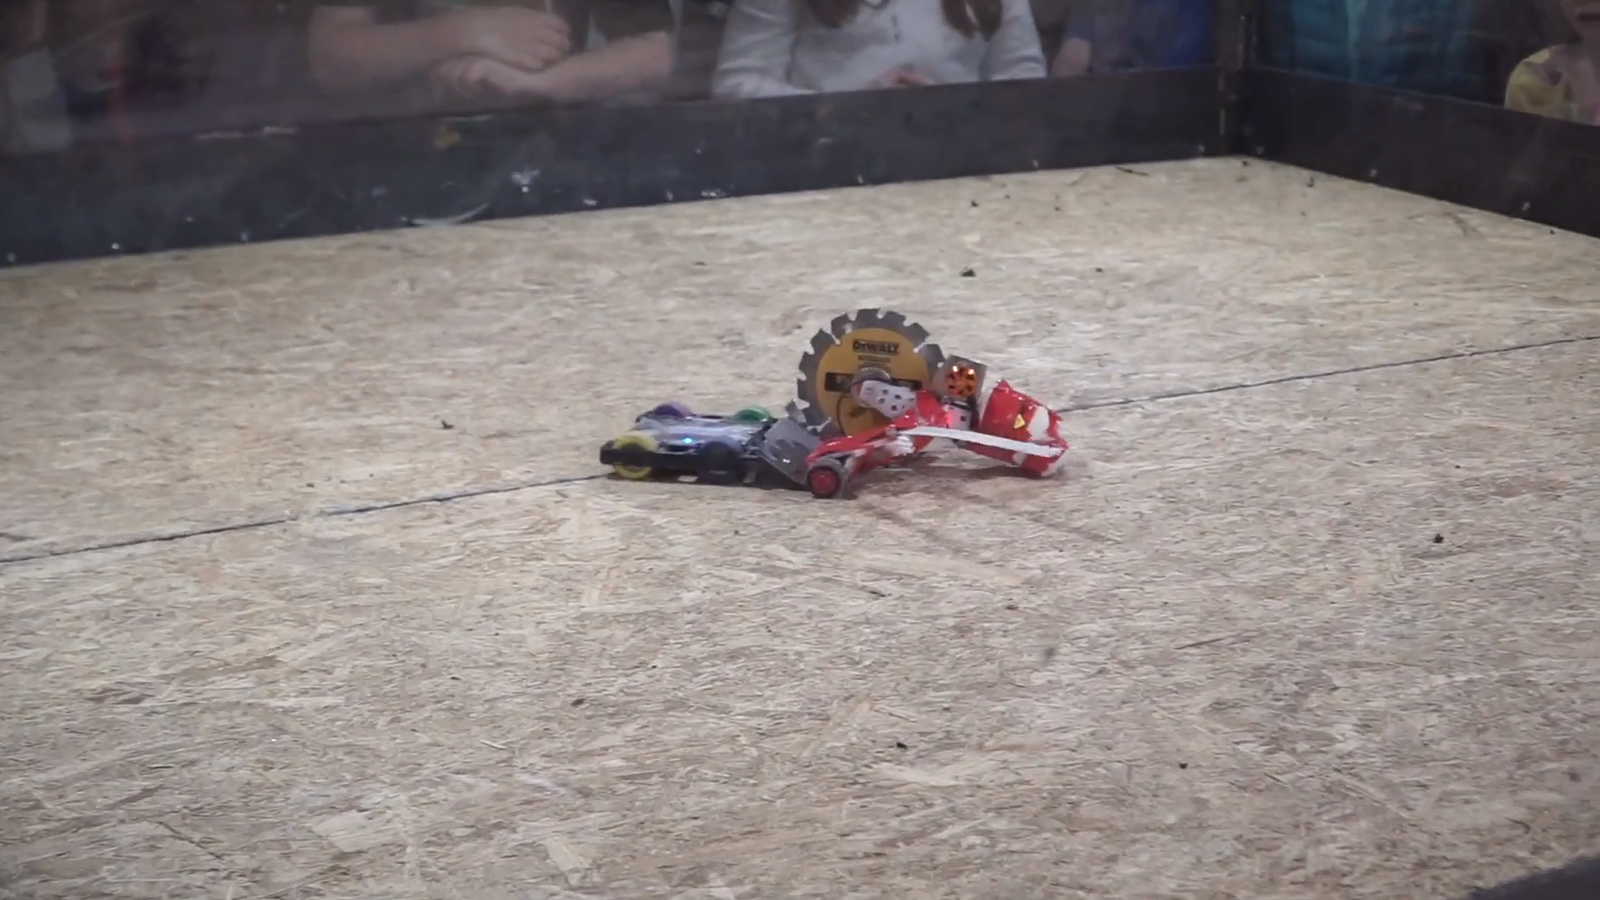 photo of YouTube Concedes Robot Fight Videos Are Not Actually Animal Cruelty After Removing Them by Mistake image